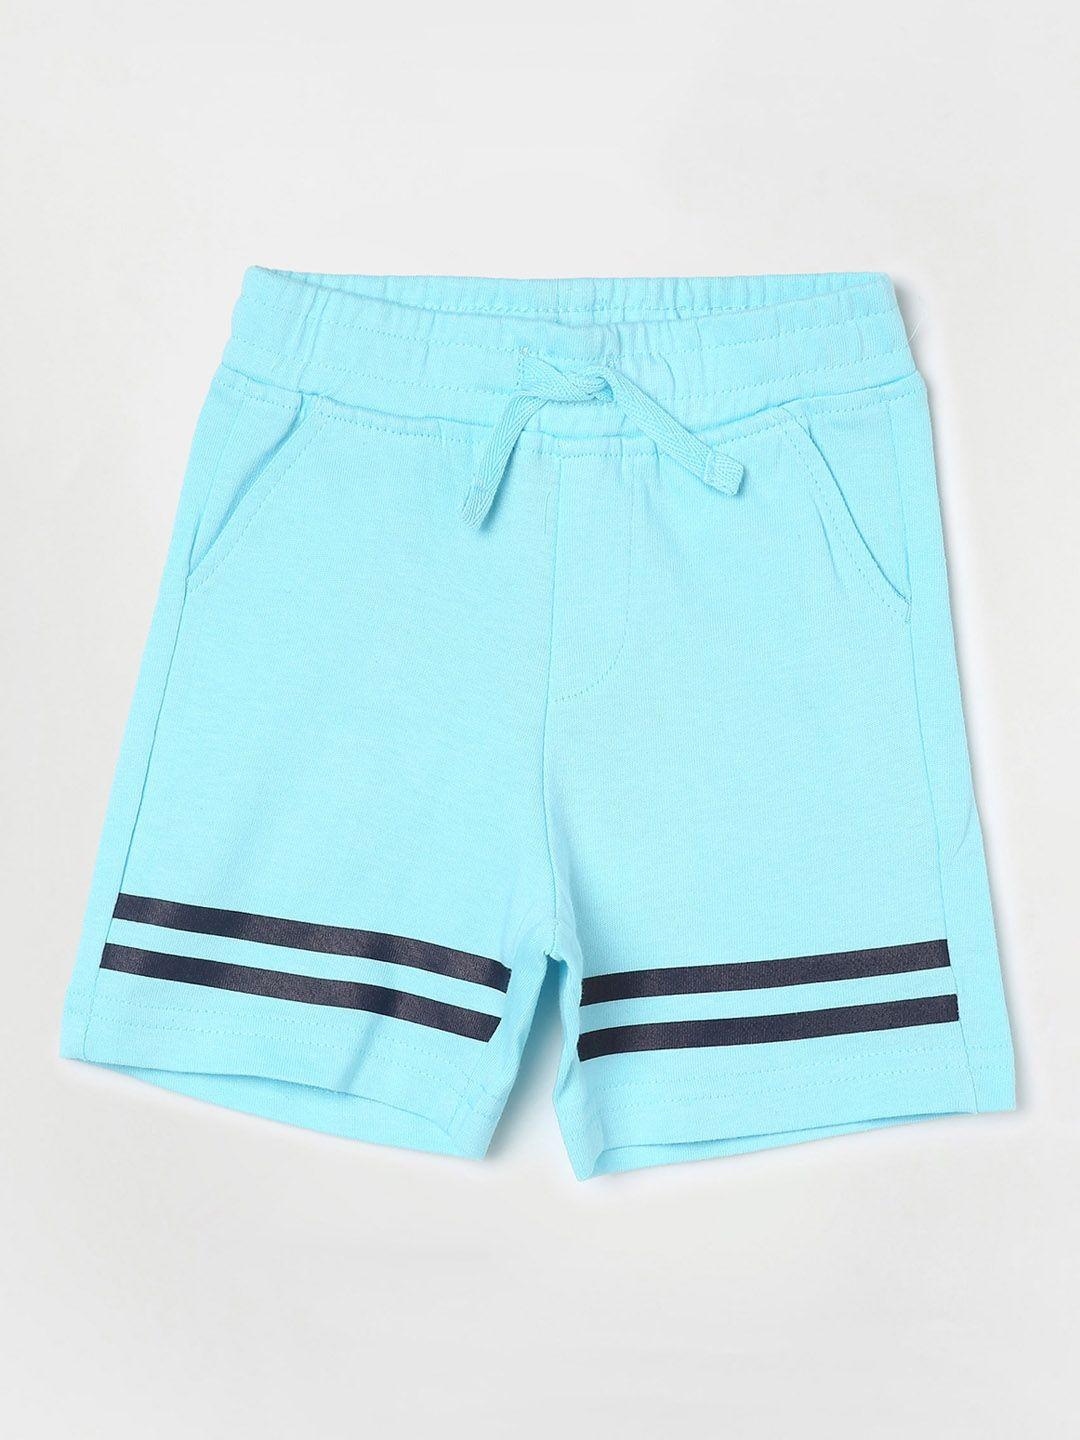 Juniors by Lifestyle Boys Striped Cotton Regular Fit Shorts